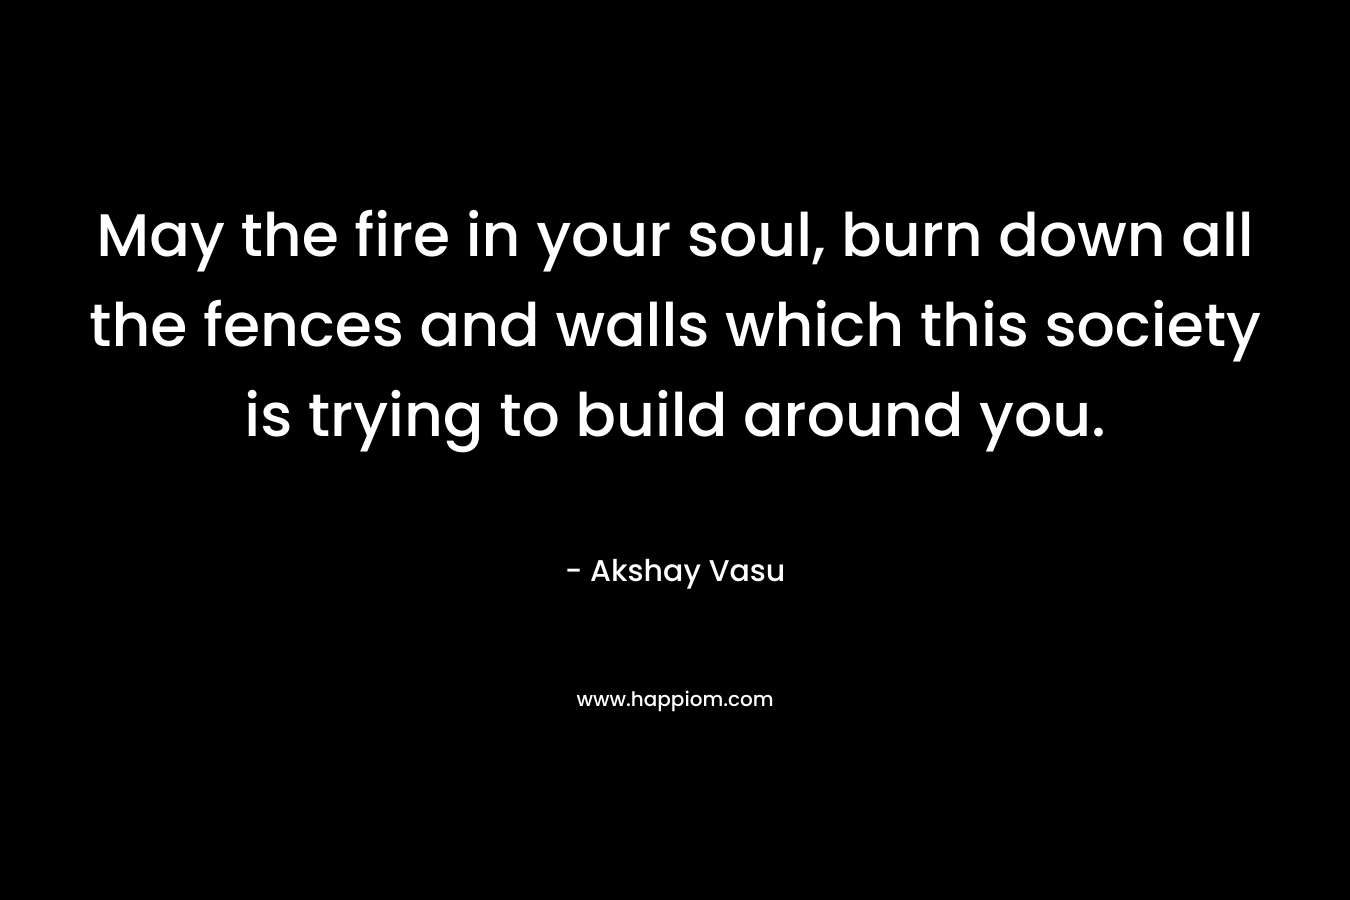 May the fire in your soul, burn down all the fences and walls which this society is trying to build around you. – Akshay Vasu